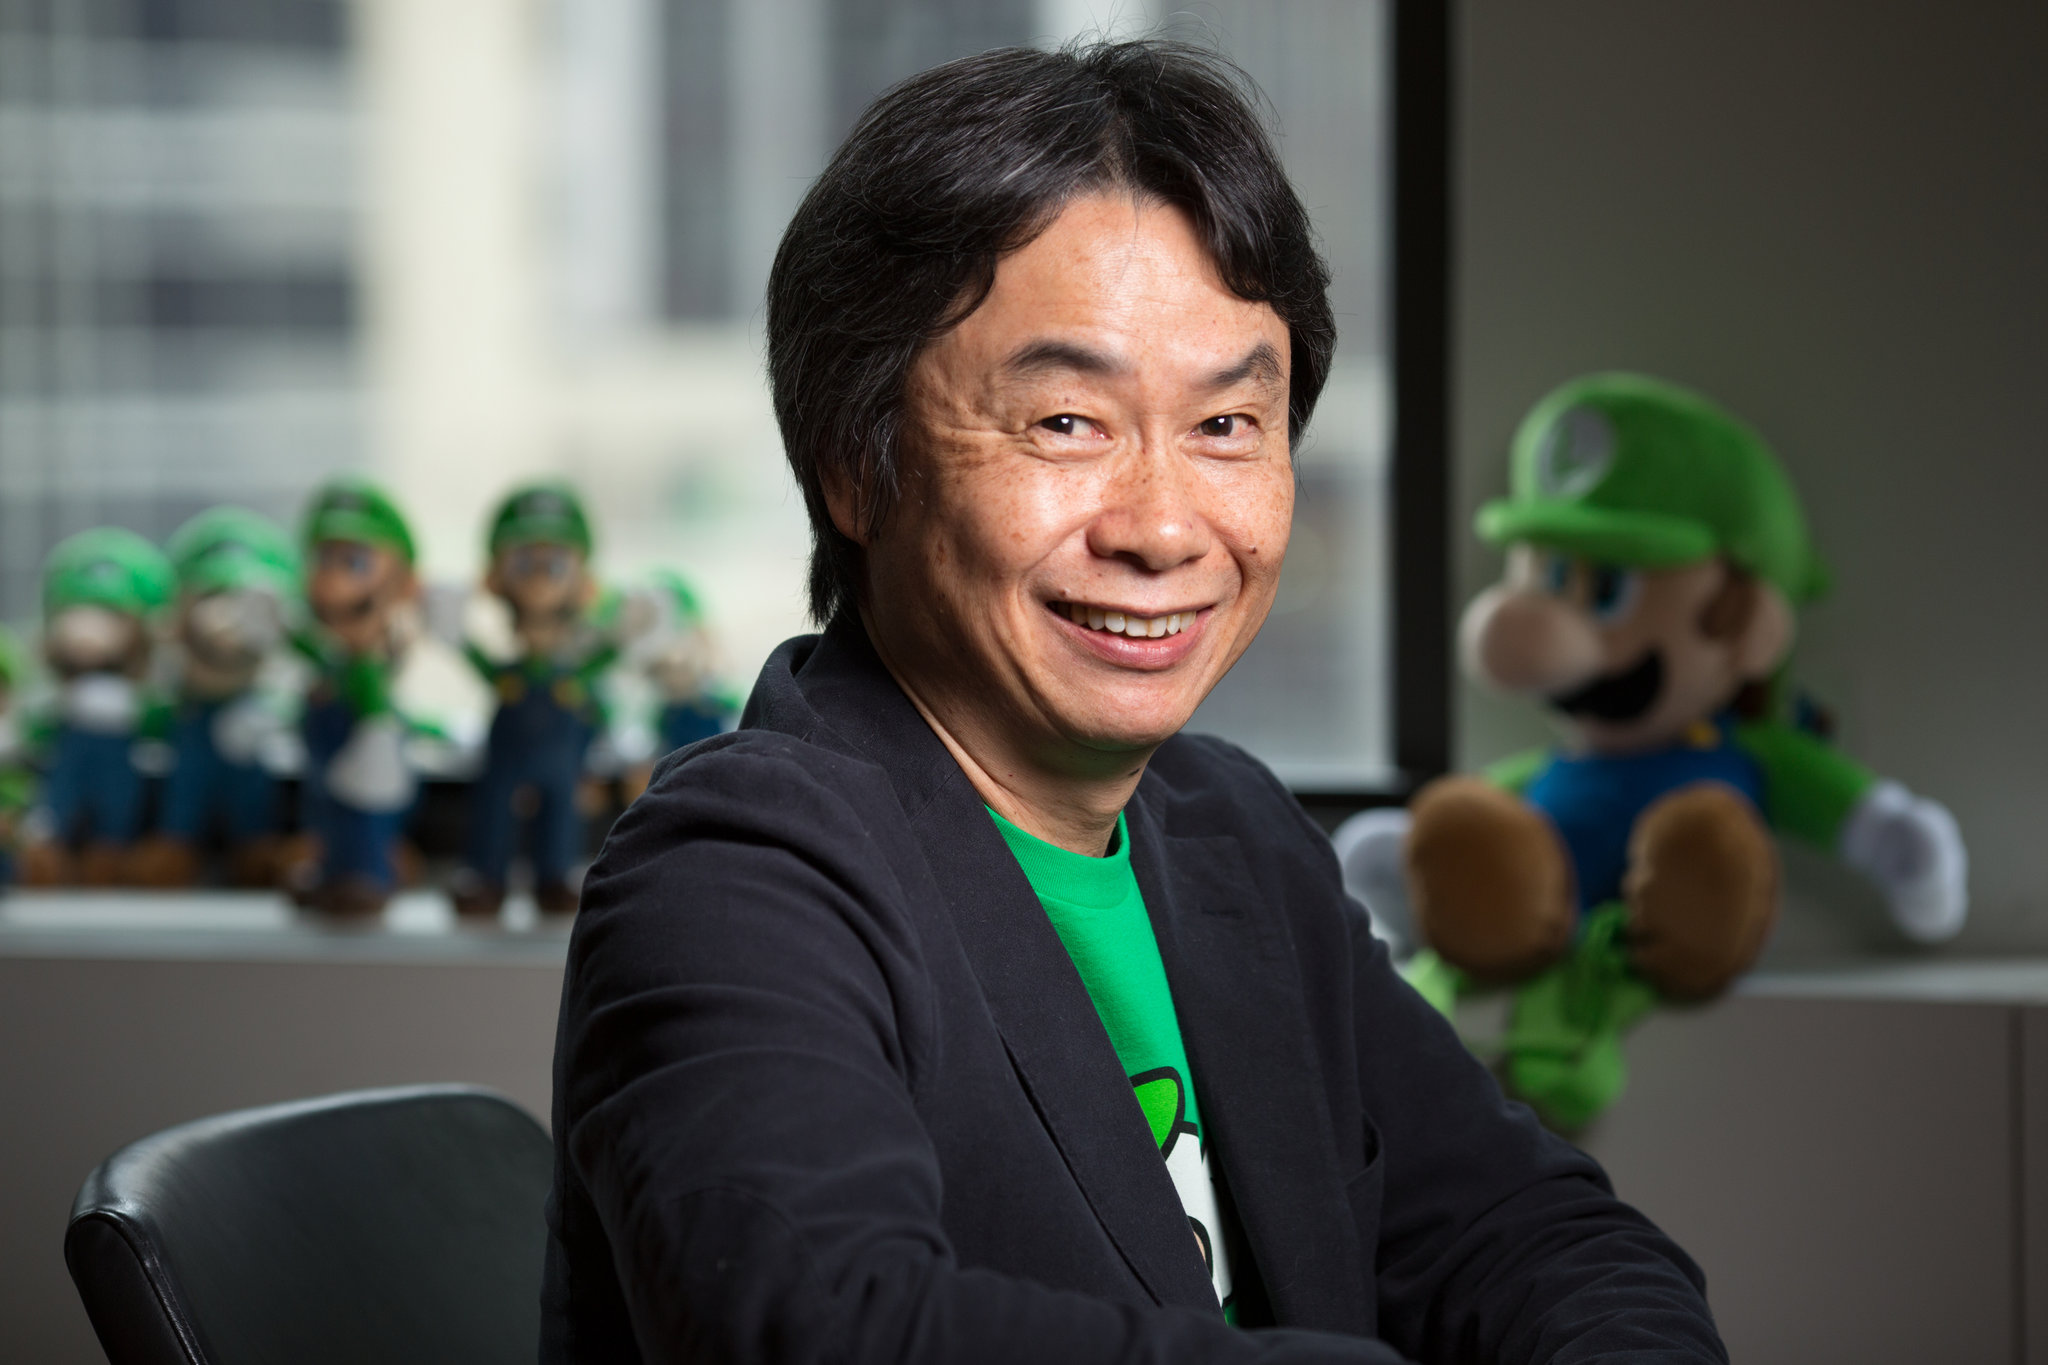 på en ferie Flyve drage Vejhus Miyamoto on the kind of boss he is, strengths and weaknesses, insuring  power doesn't go to his head